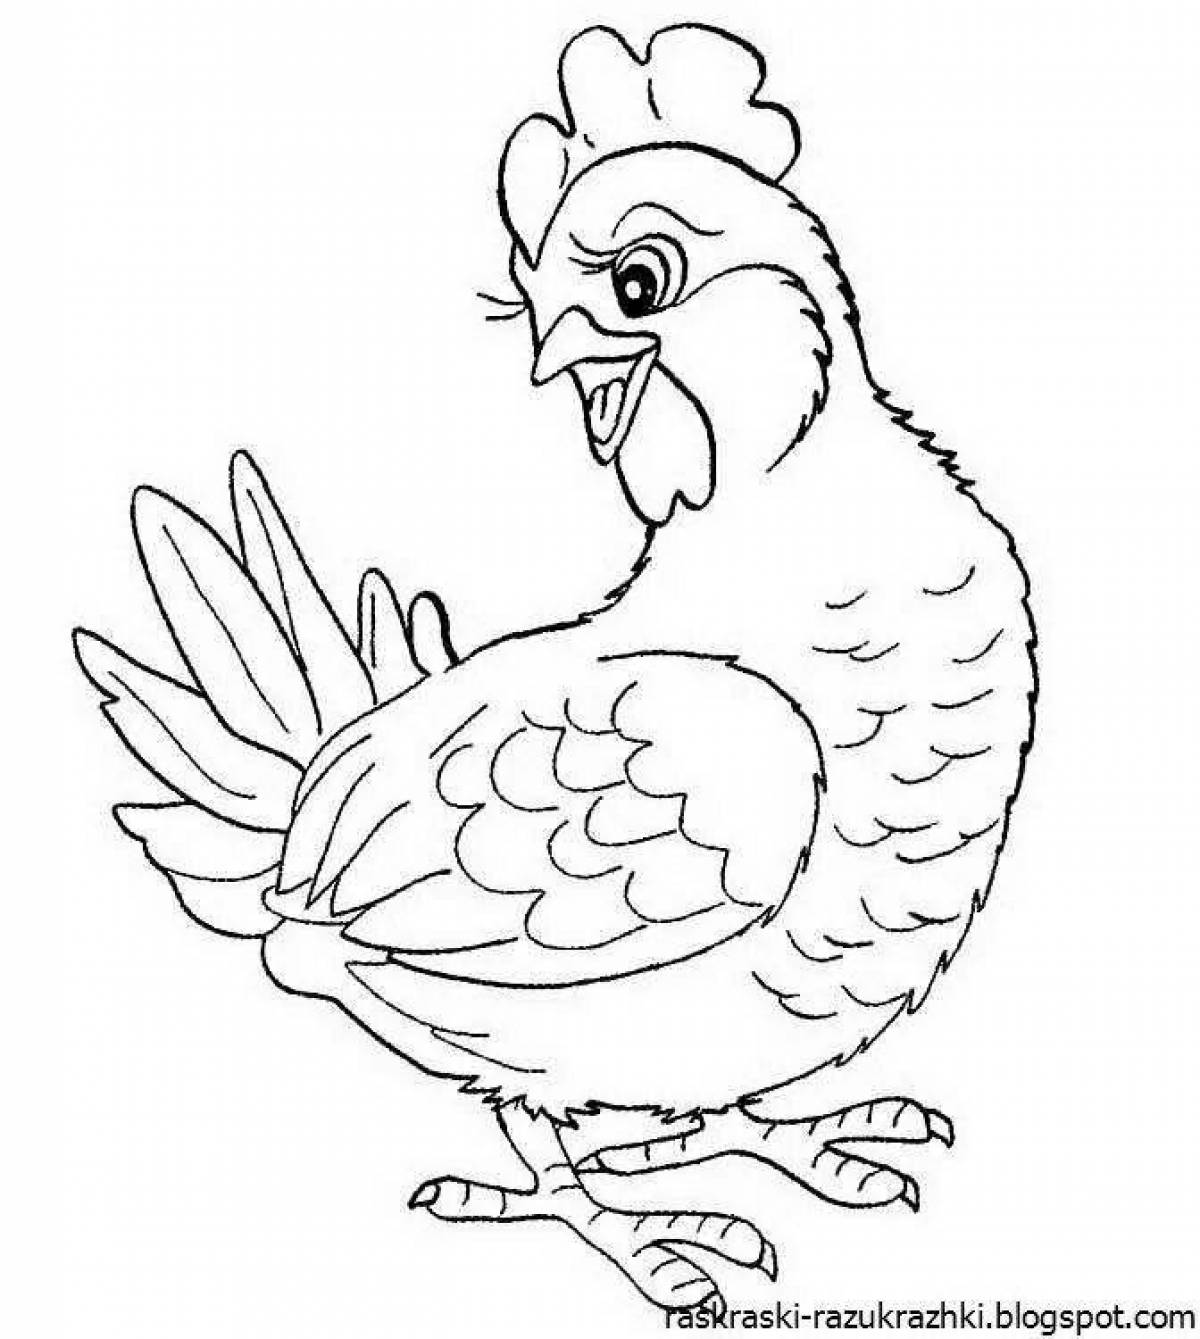 Coloring page shiny chicks